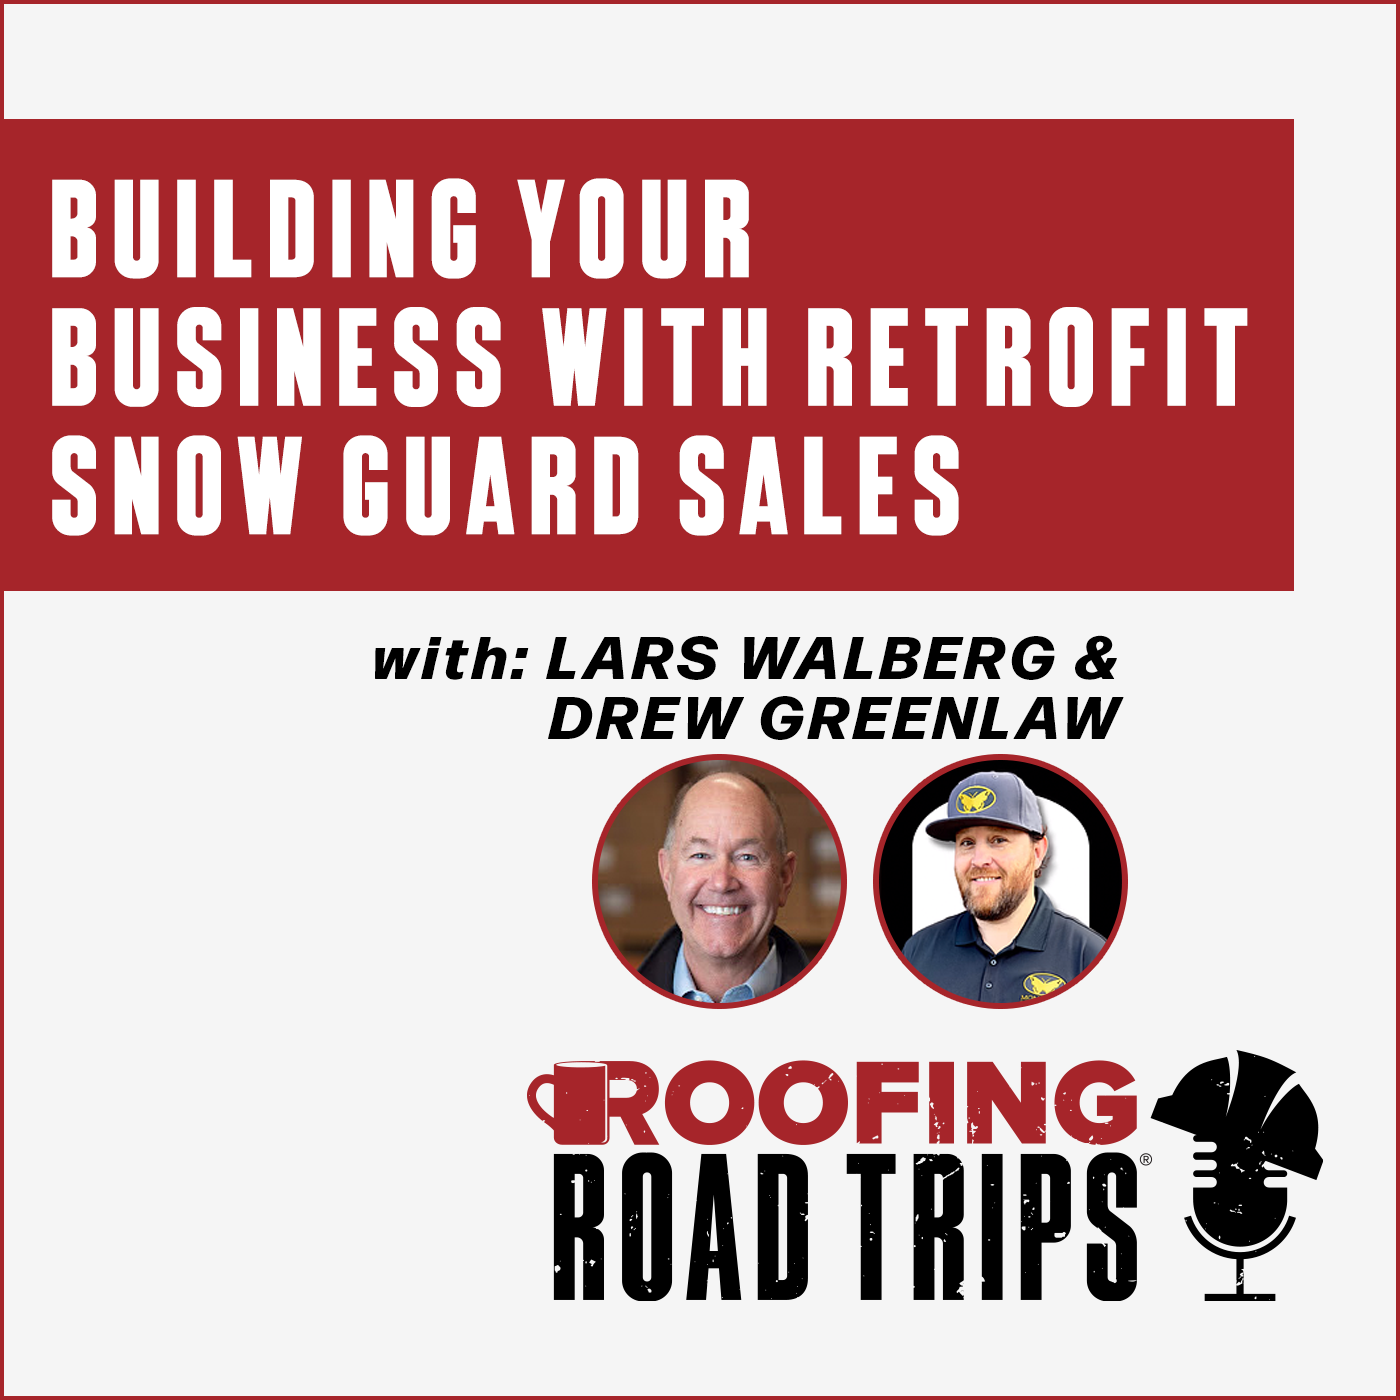 Lars Walberg and Drew Greenlaw - Building Your Business with Retrofit Snow Guard Sales